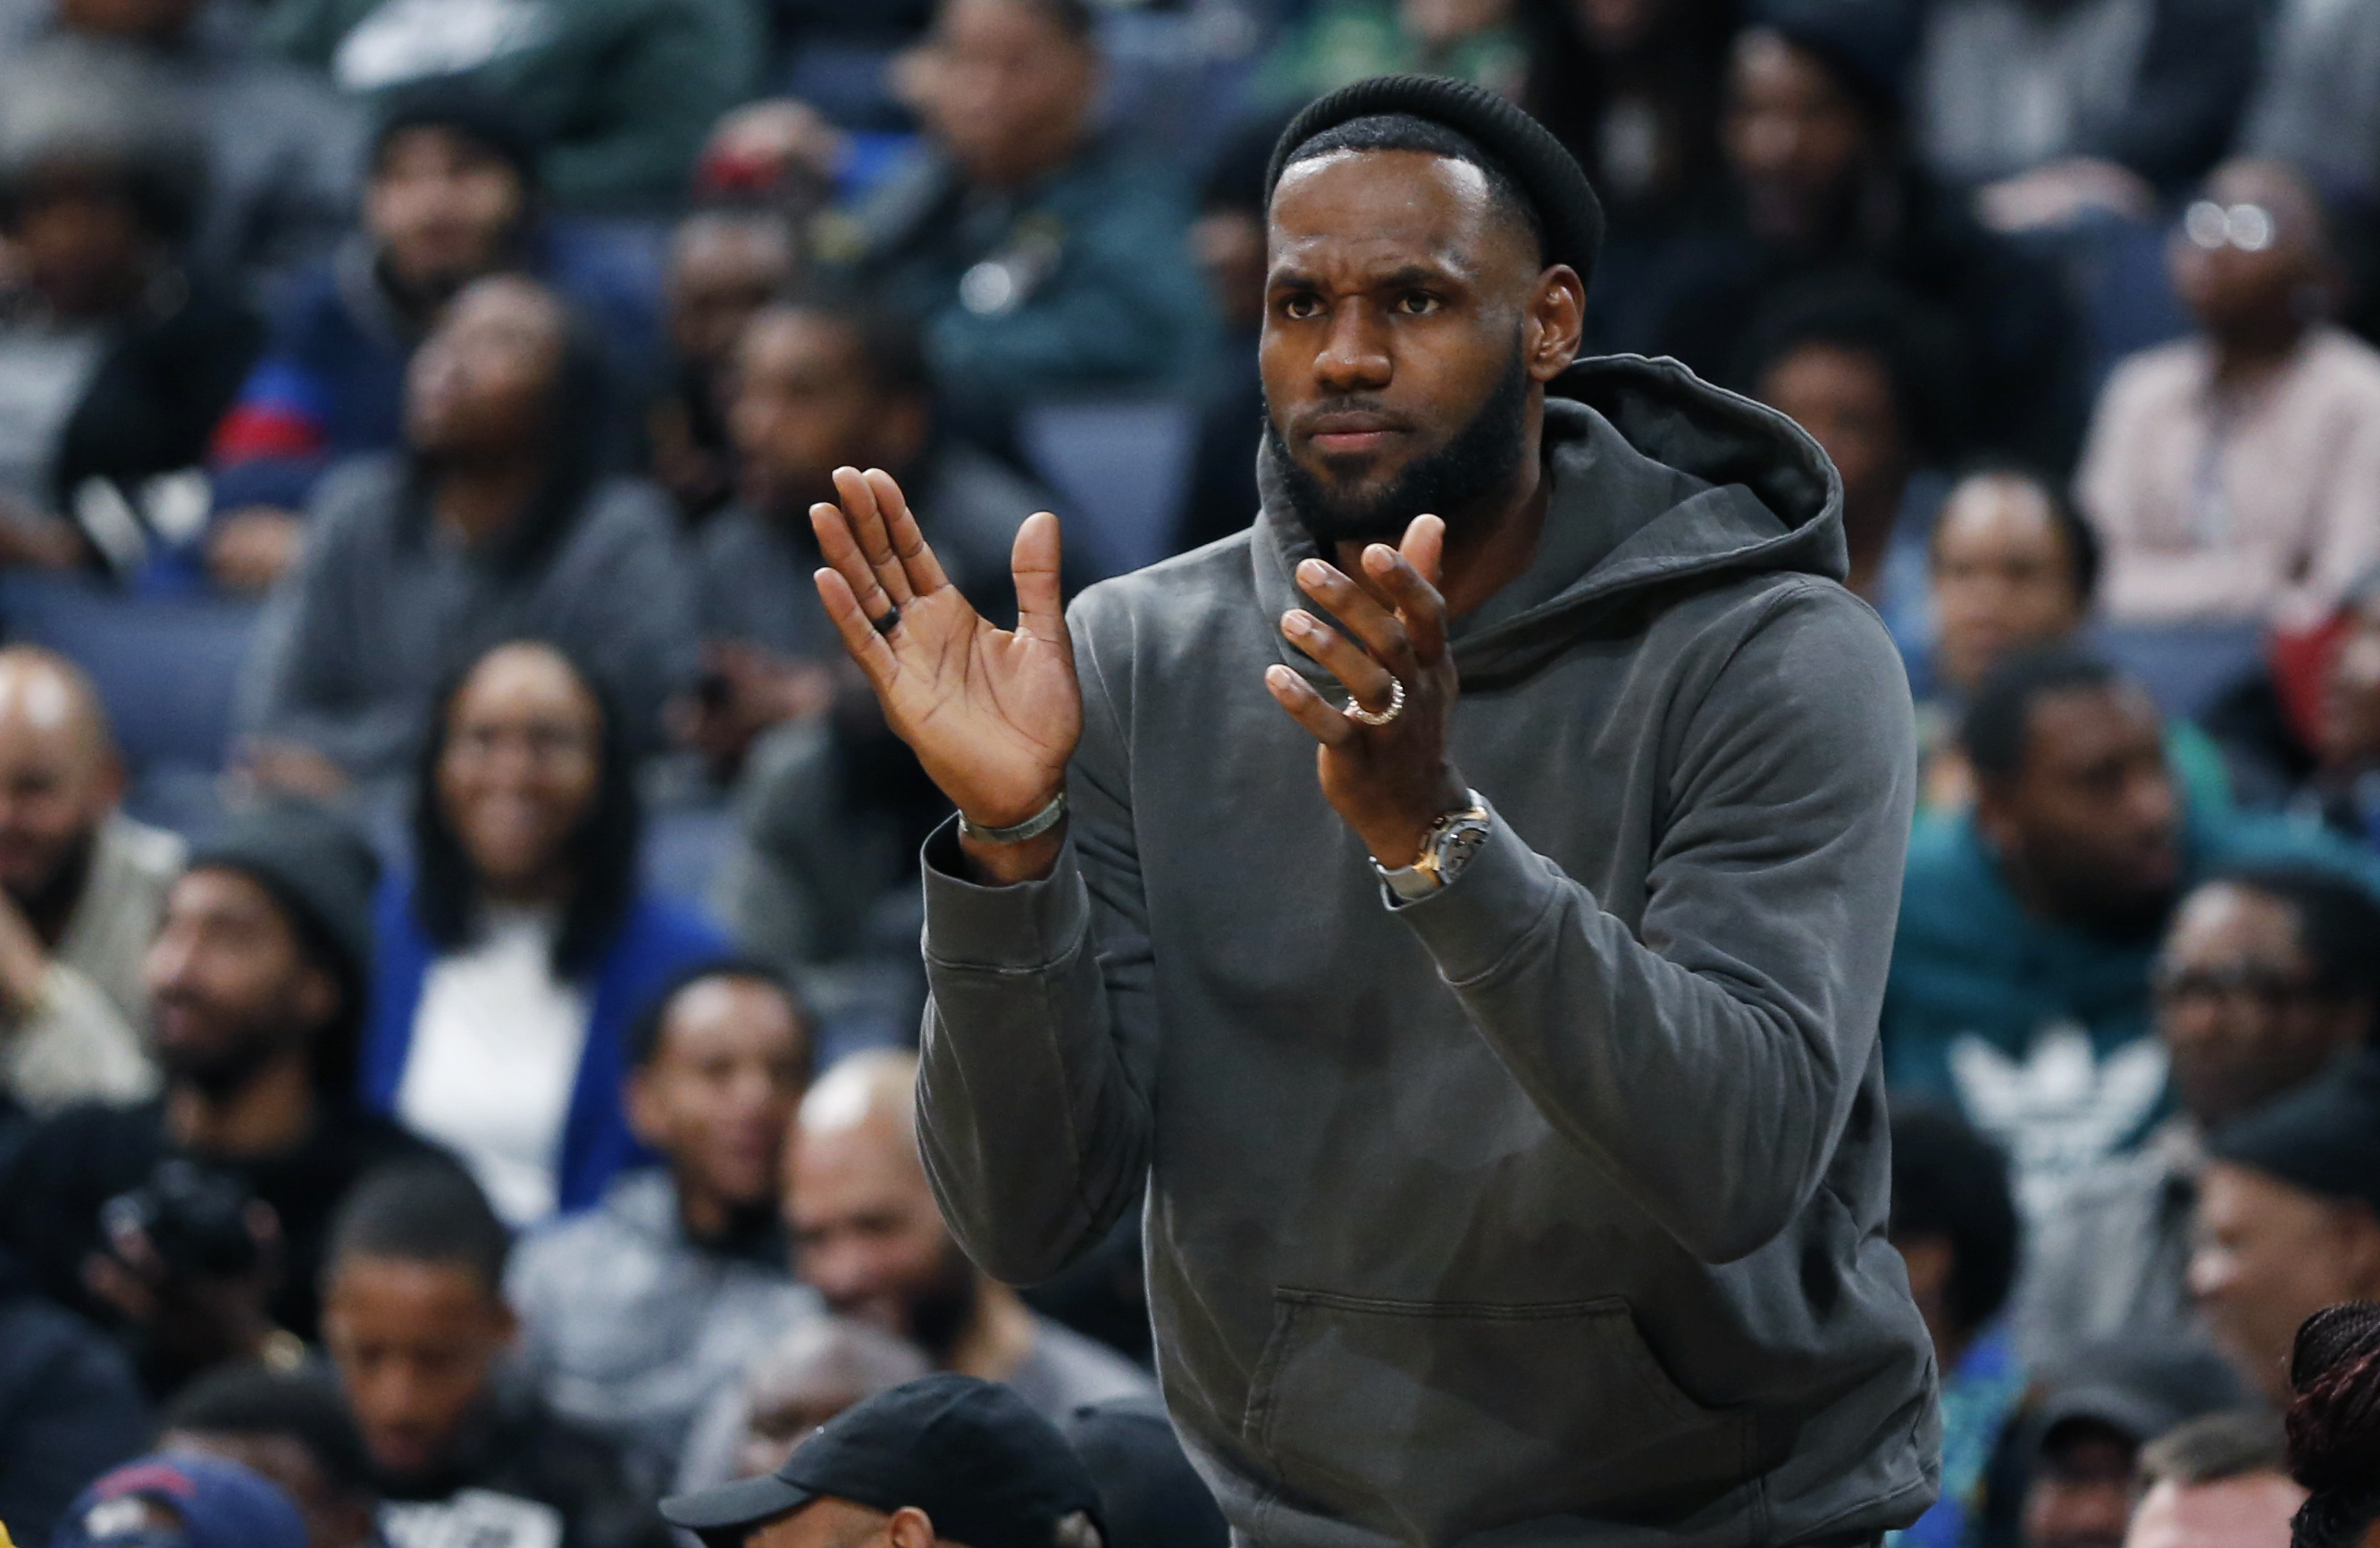 LeBron James returns to St. Vincent-St. Mary to honor his high school  coach, Dru Joyce - Sports Illustrated High School News, Analysis and More